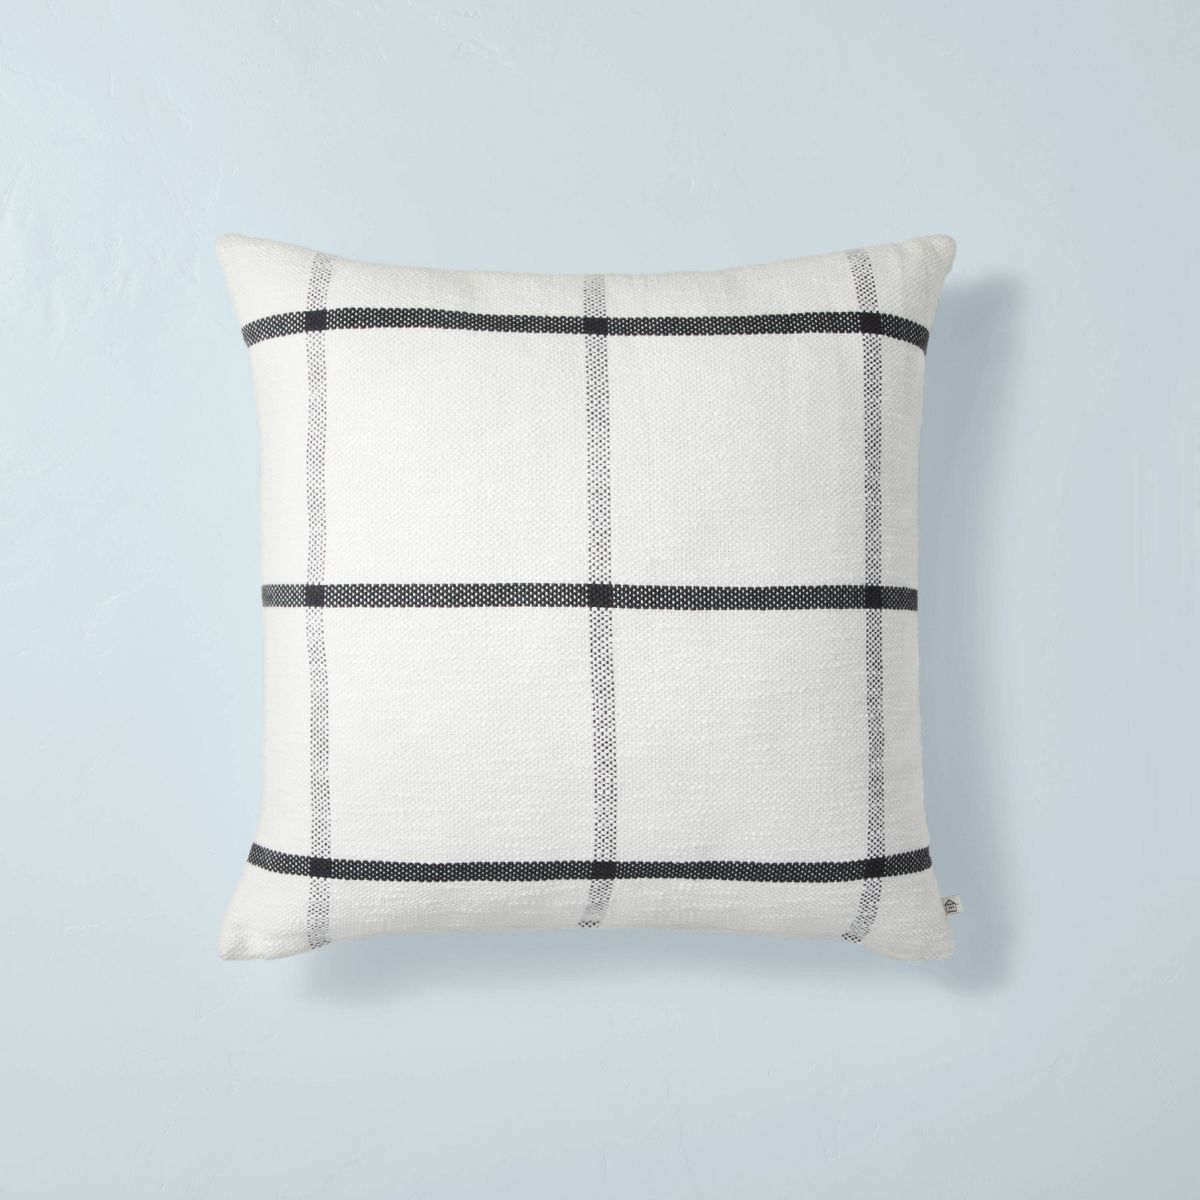 24"x24" Open Grid Lines Square Throw Pillow Cream/Gray - Hearth & Hand™ with Magnolia | Target